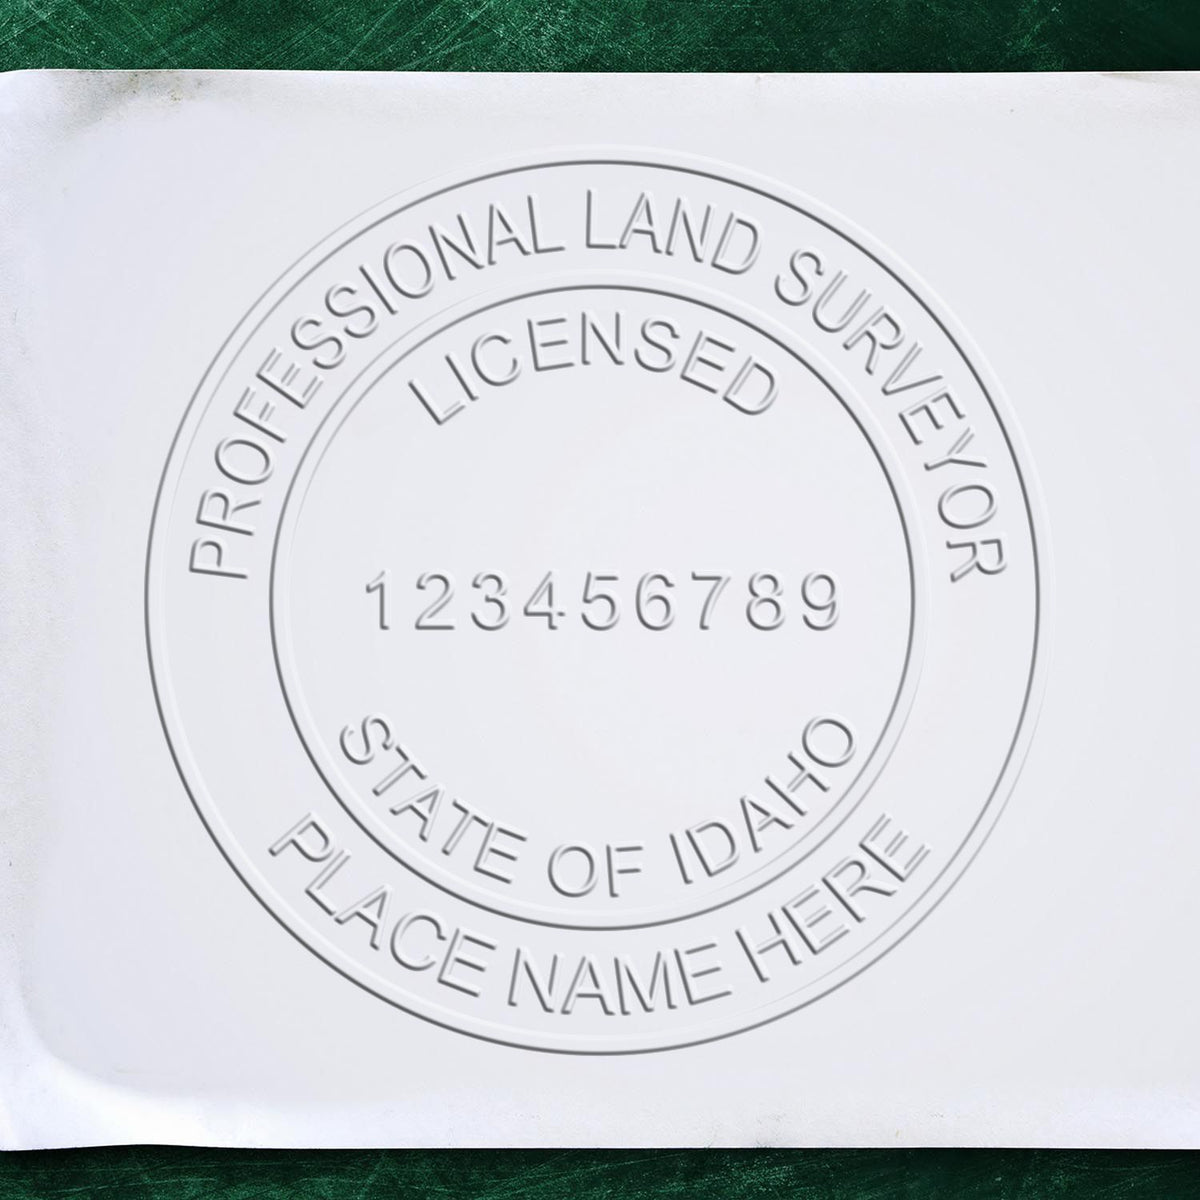 An alternative view of the Heavy Duty Cast Iron Idaho Land Surveyor Seal Embosser stamped on a sheet of paper showing the image in use